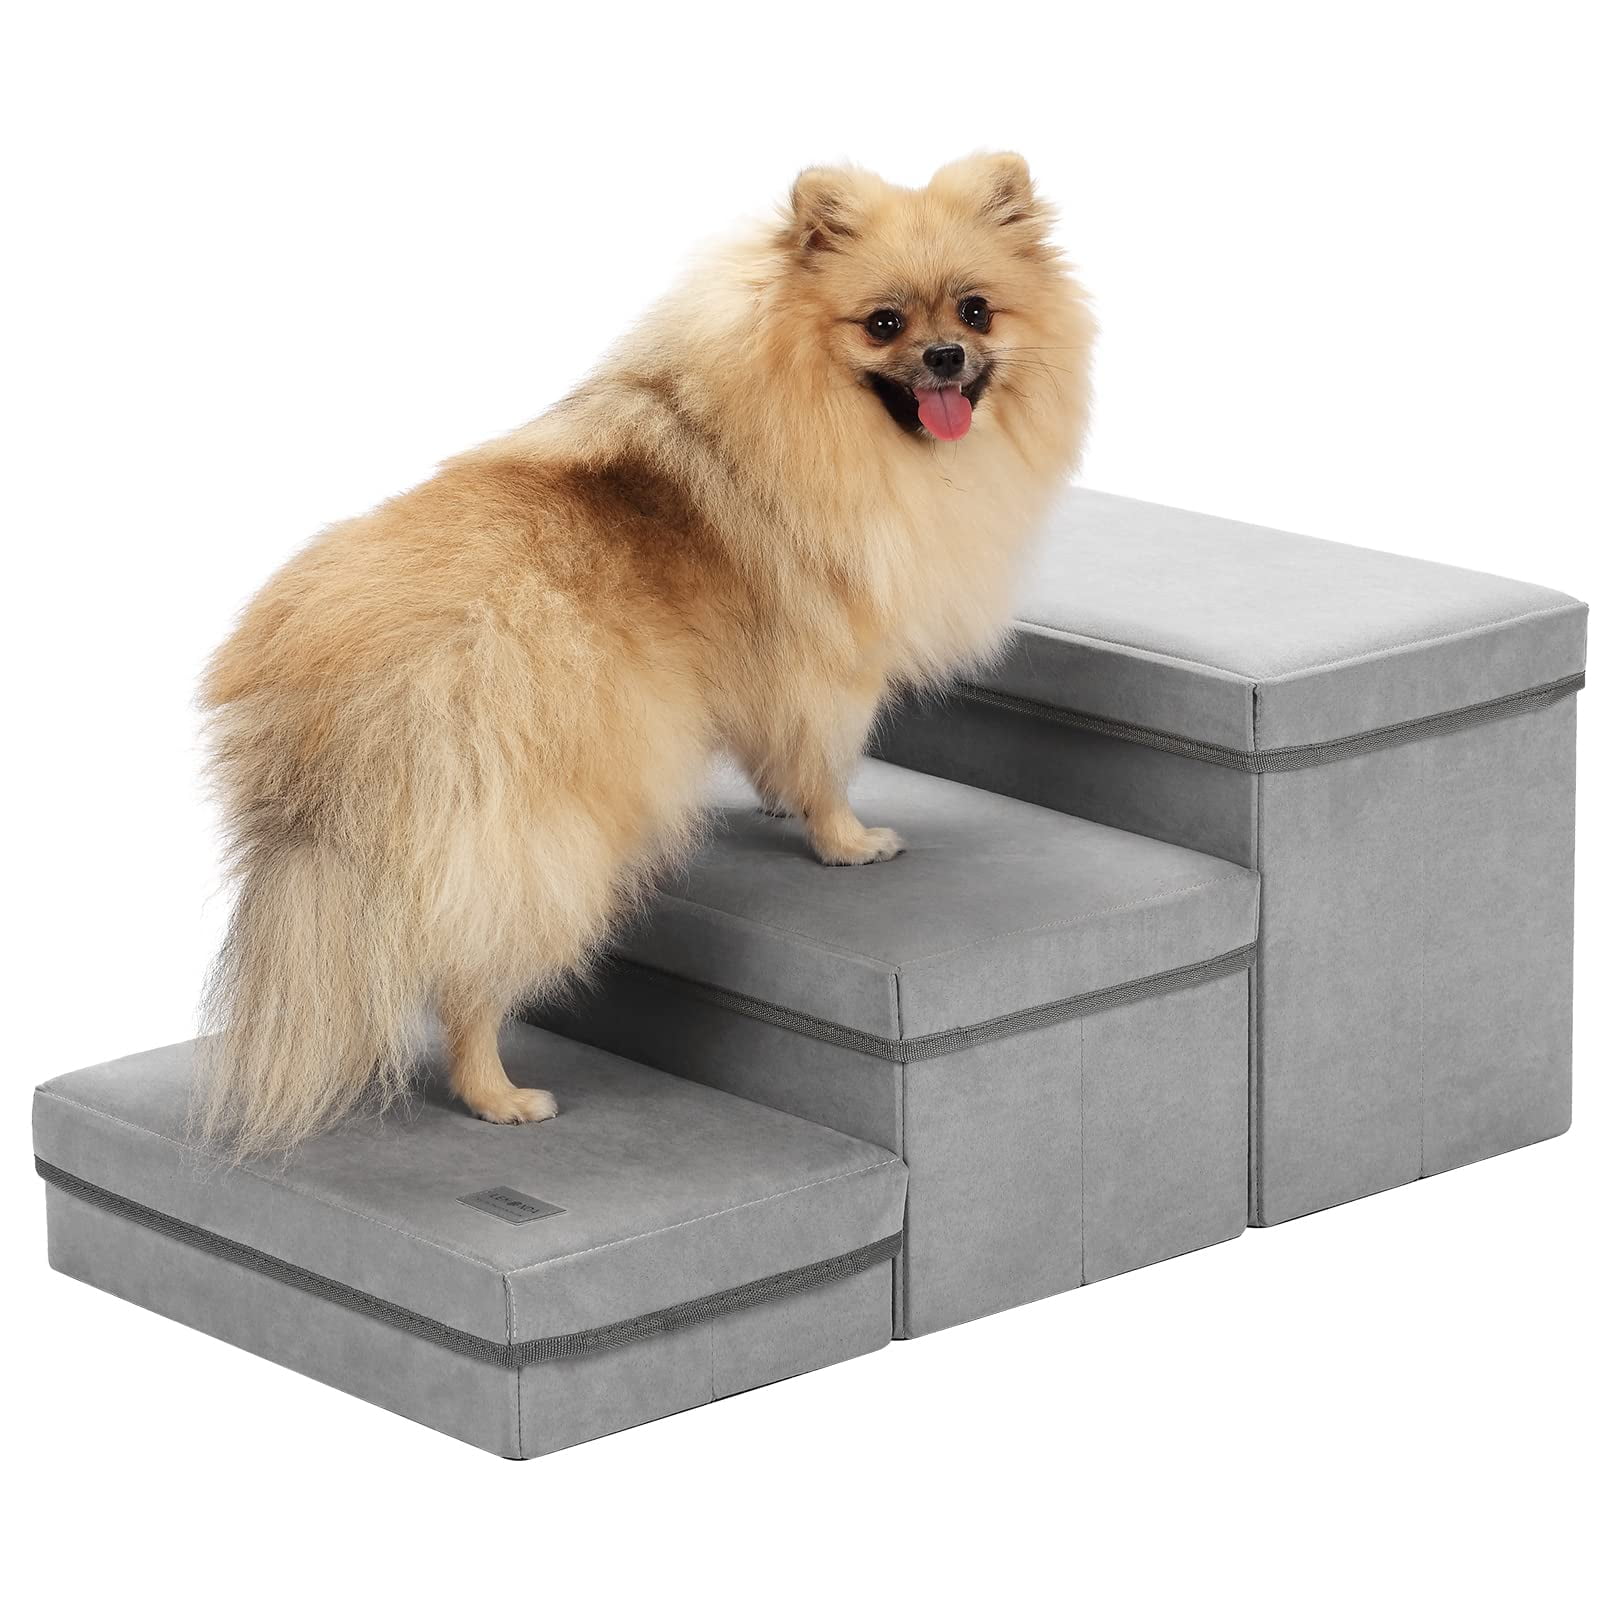 LEMONDA Step Folding Dog Step Stairs,Foldable Dog Stairs with 3 Storage Boxes for High Bed & Sofa,Pet Storage Stepper & Safety Ladder for Cats Dogs up to 60 pounds - Walmart.com